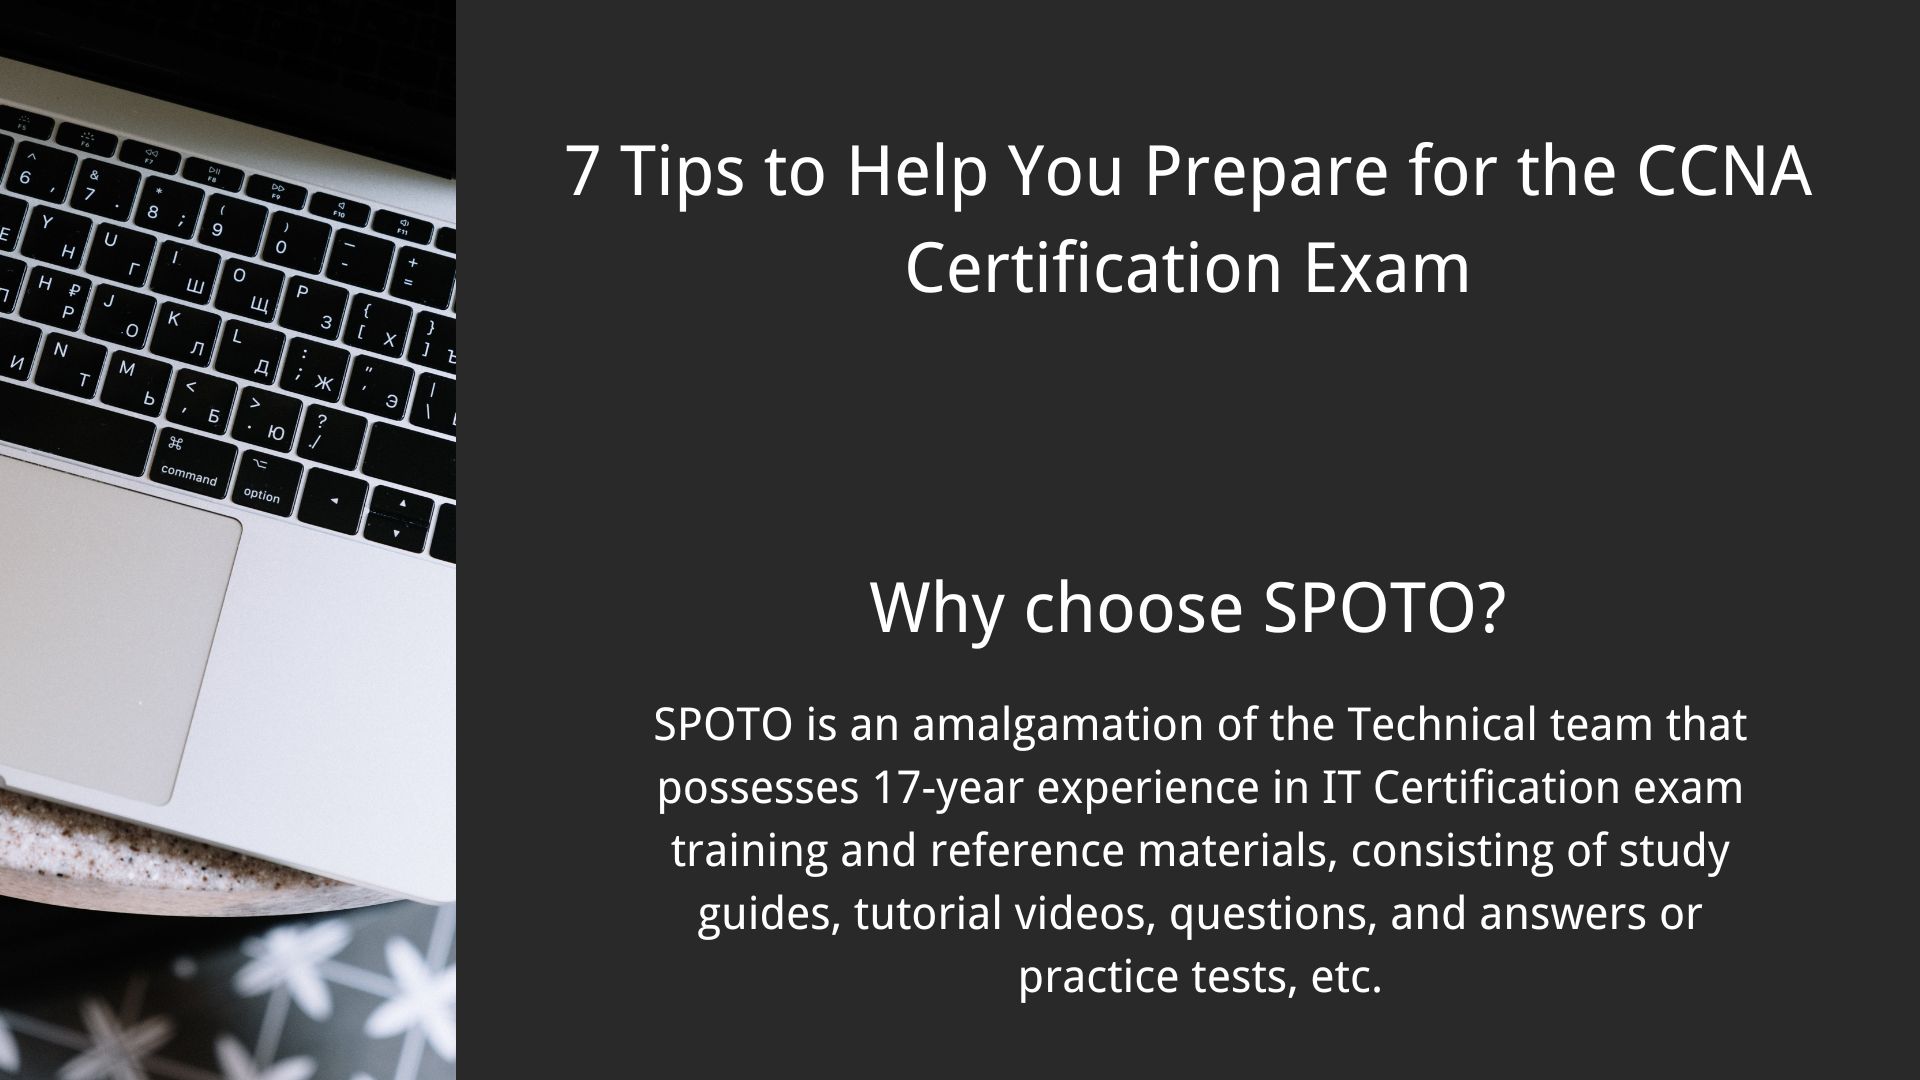 7 Tips to Help You Prepare for the CCNA Certification Exam